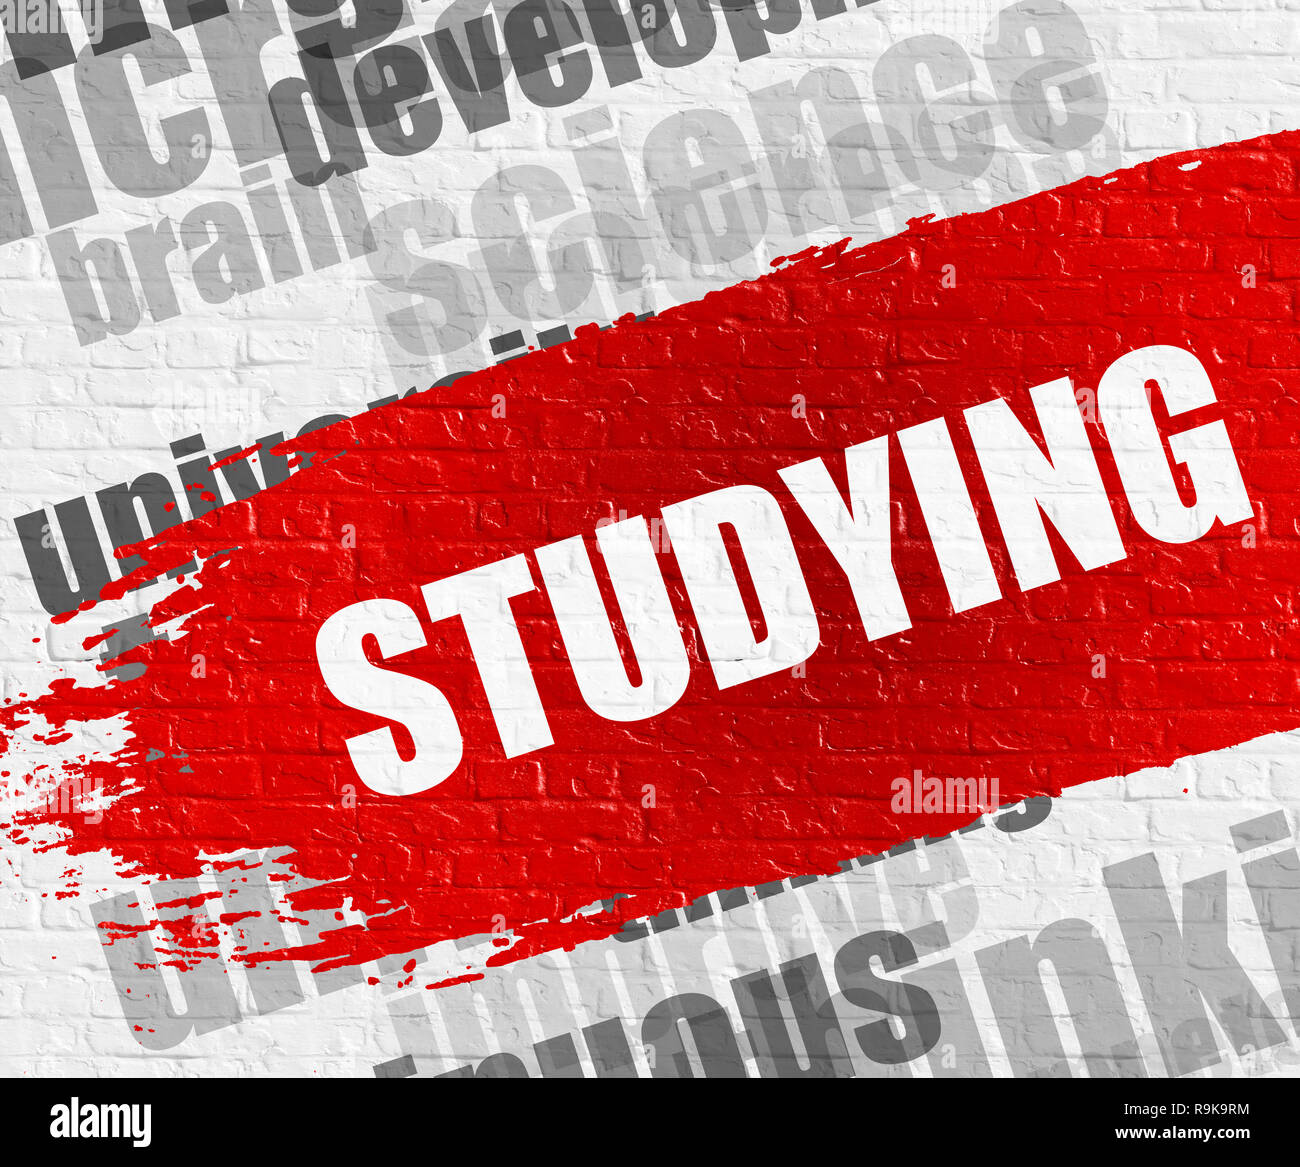 Education Concept: Studying on the Brickwall Background with Wordcloud Around It. Studying - on the Brick Wall with Word Cloud Around. Modern Illustra Stock Photo